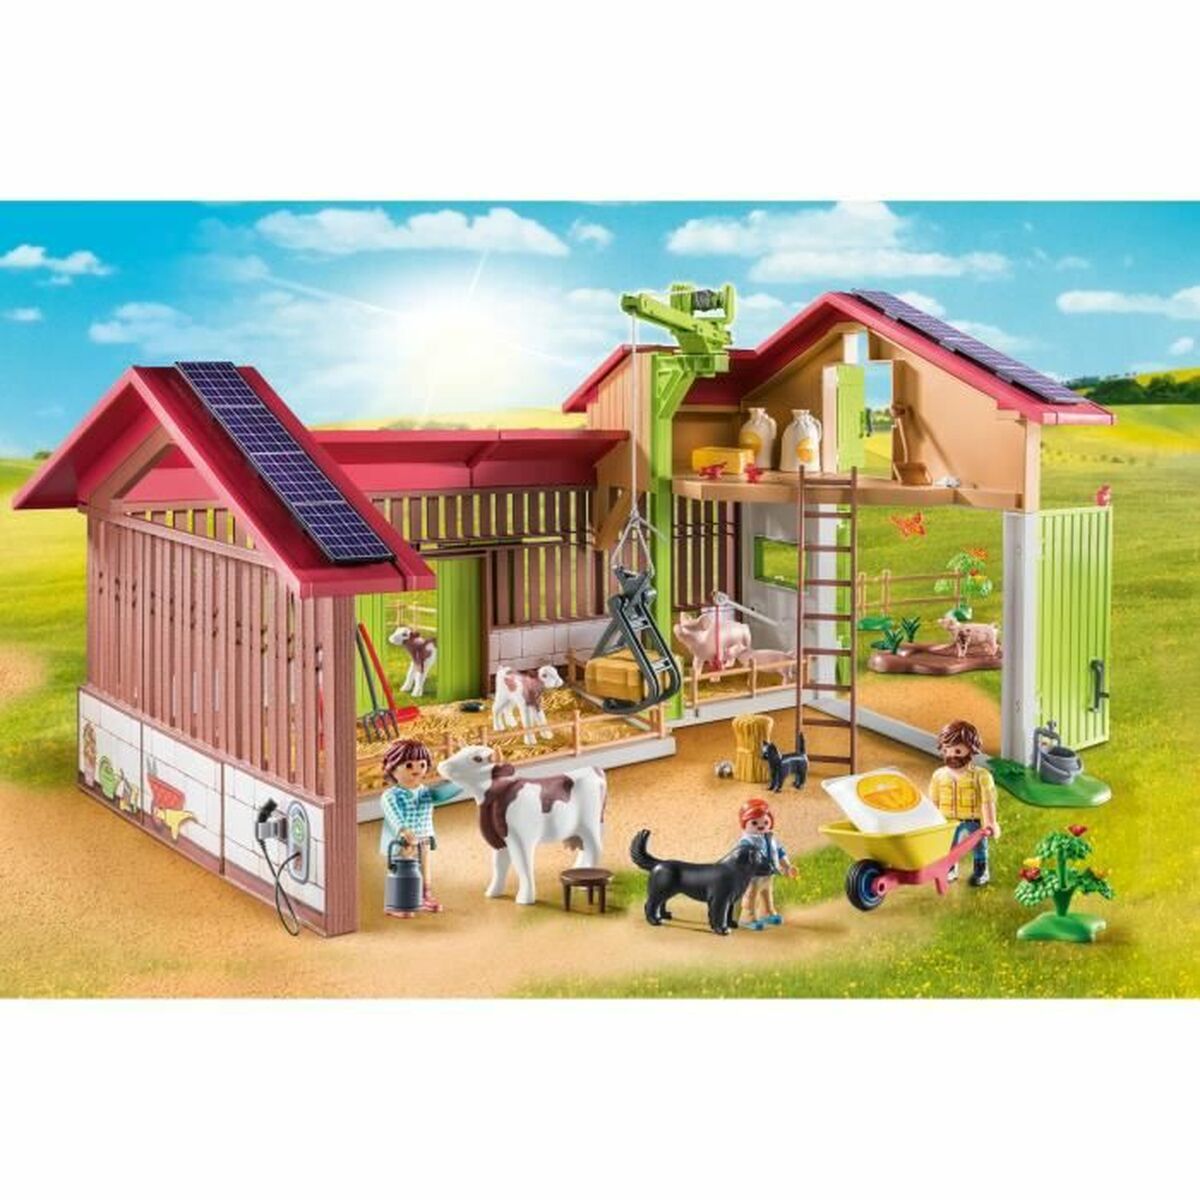 Toy set Playmobil Country Plastic